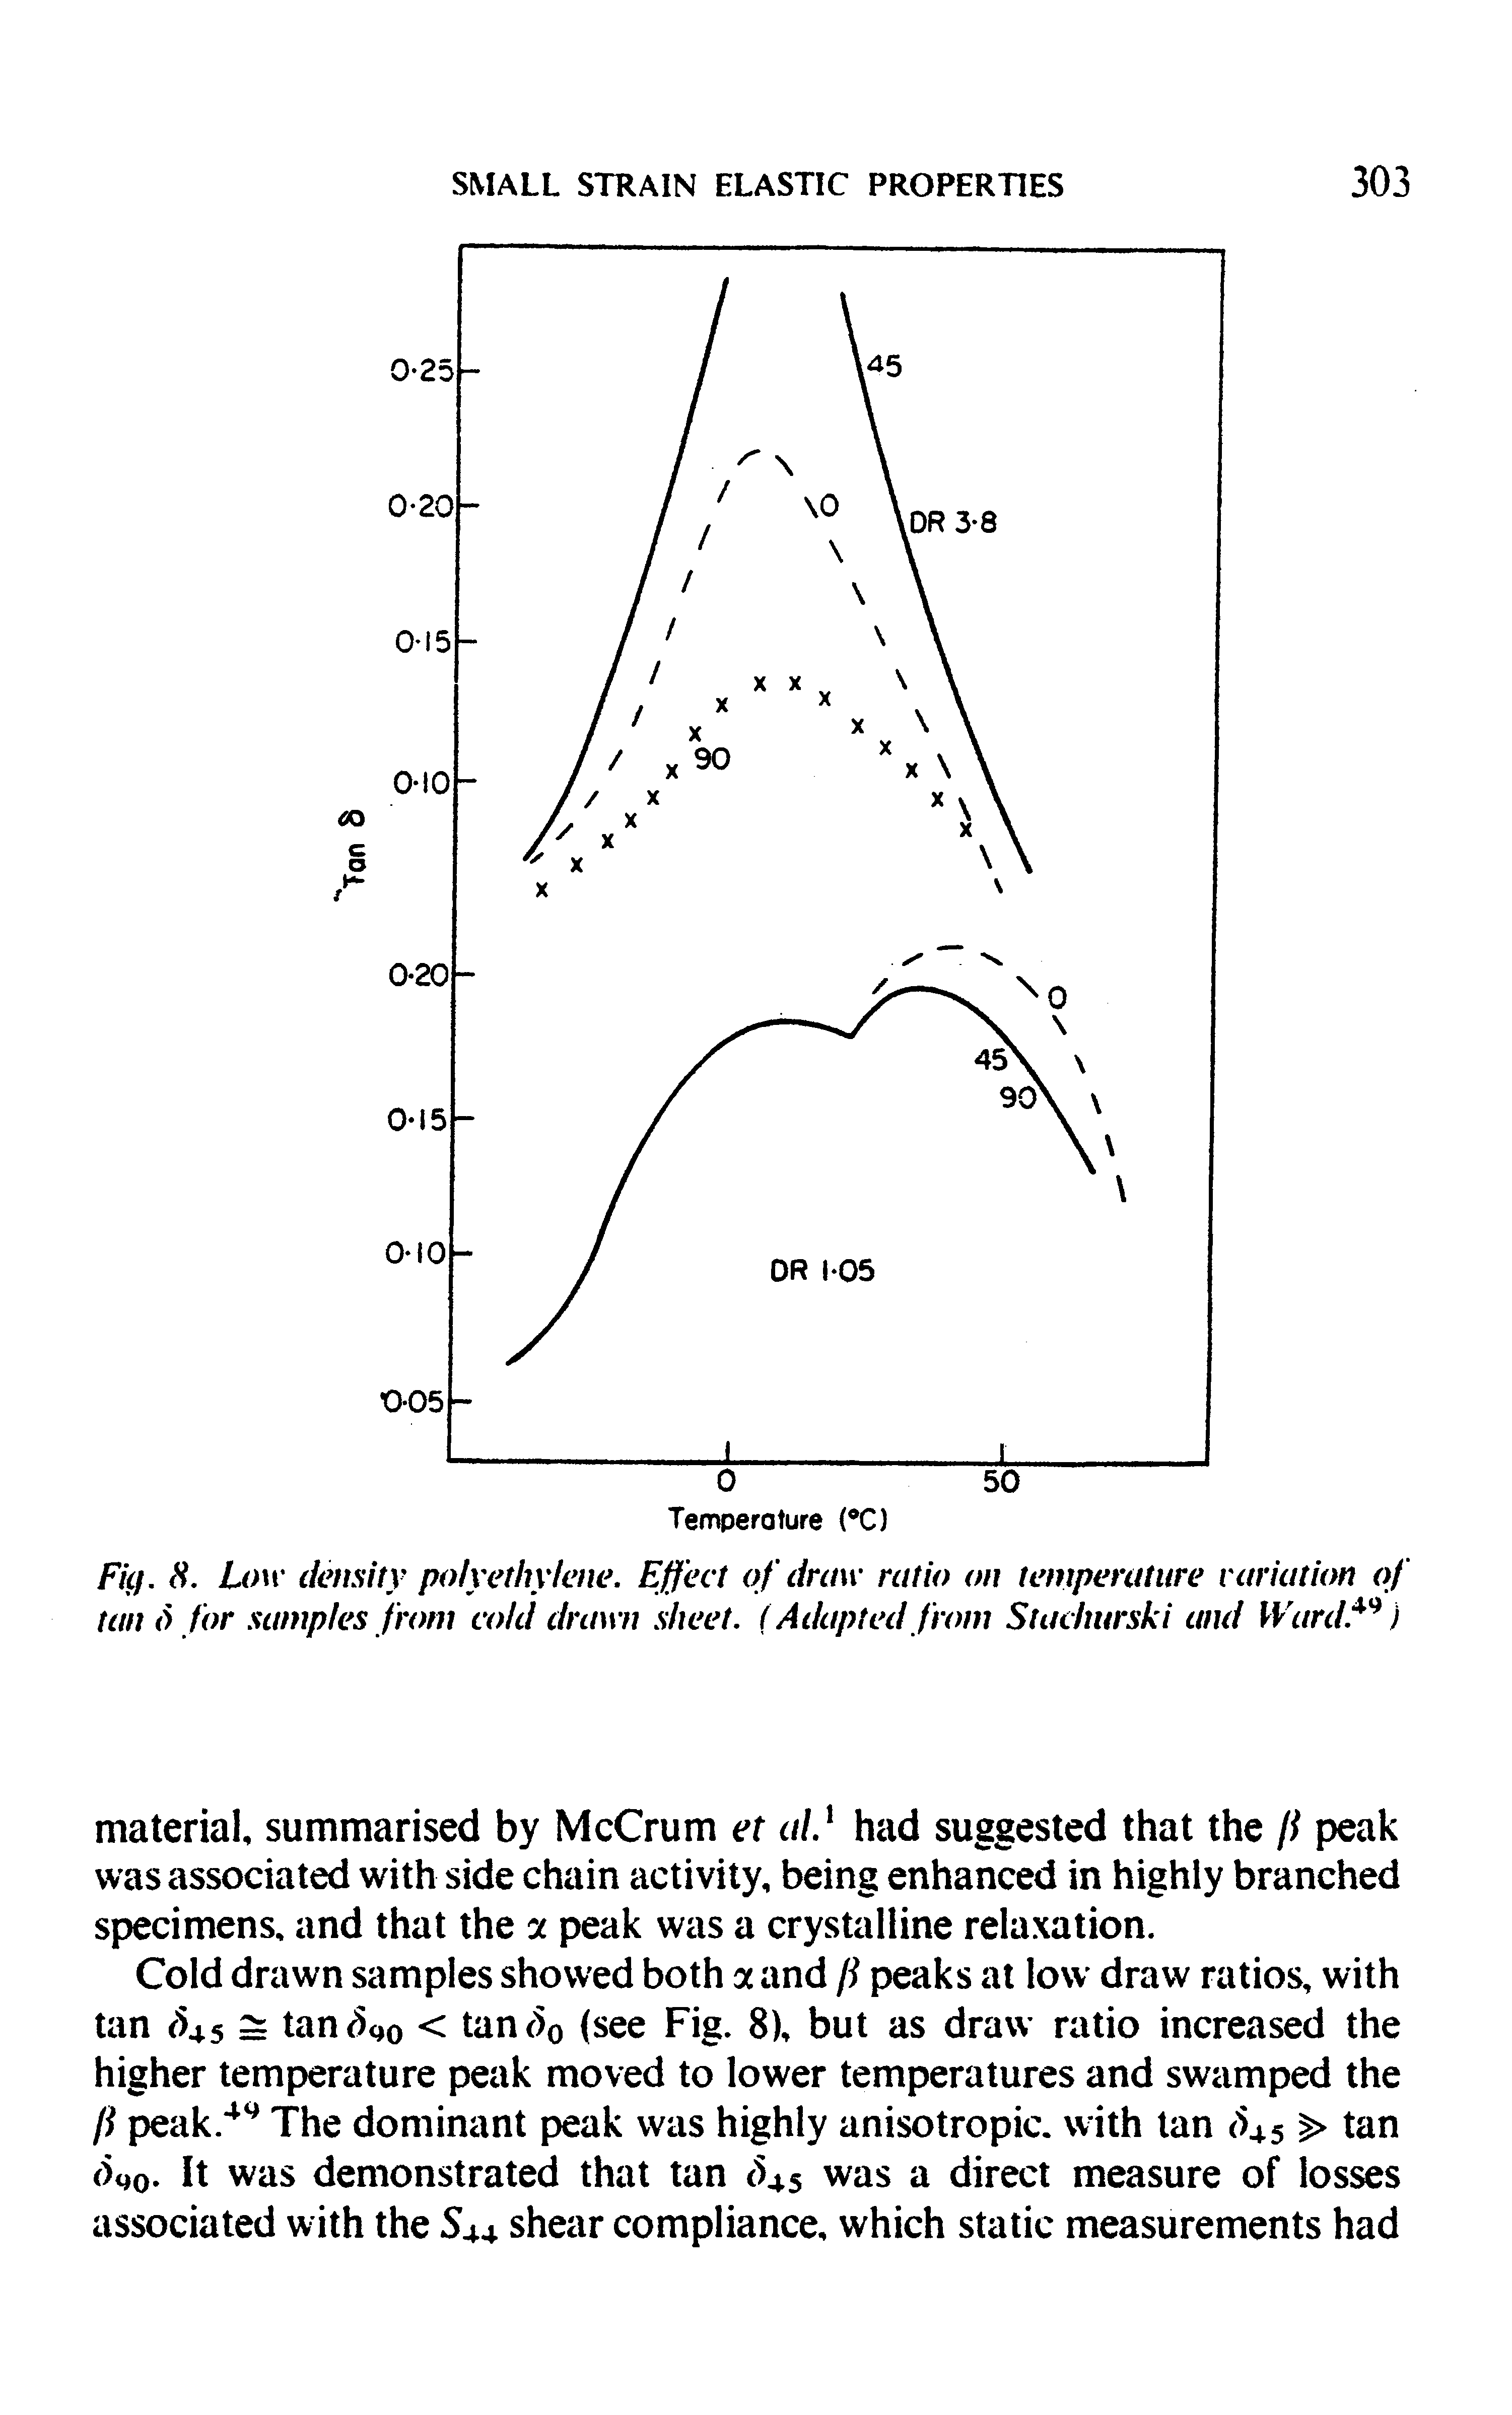 Fig. 8. Low density polyethylene. Effect of draw ratio on temperature variation of tan 0 for samples from cold drawn. sheet. (Adapted from Stachurski and Ward. i...